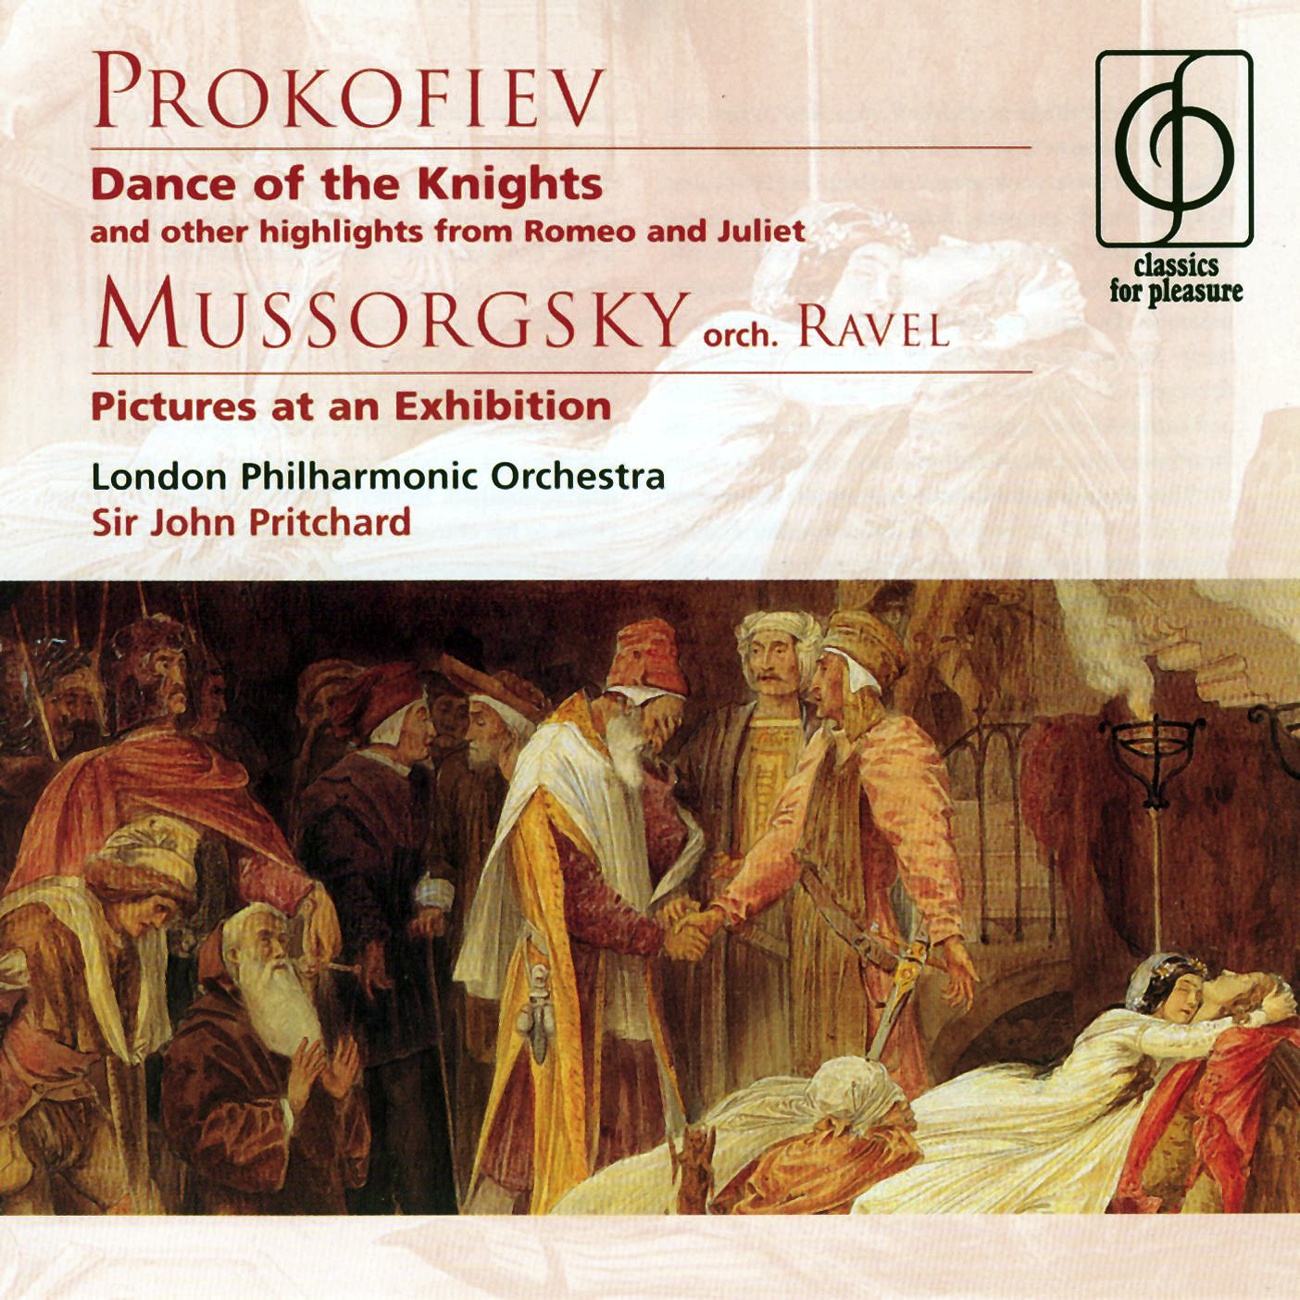 Prokofiev Dance of the Knights and other highlights from Romeo and Juliet; Mussorgsky Pictures at an Exhibition